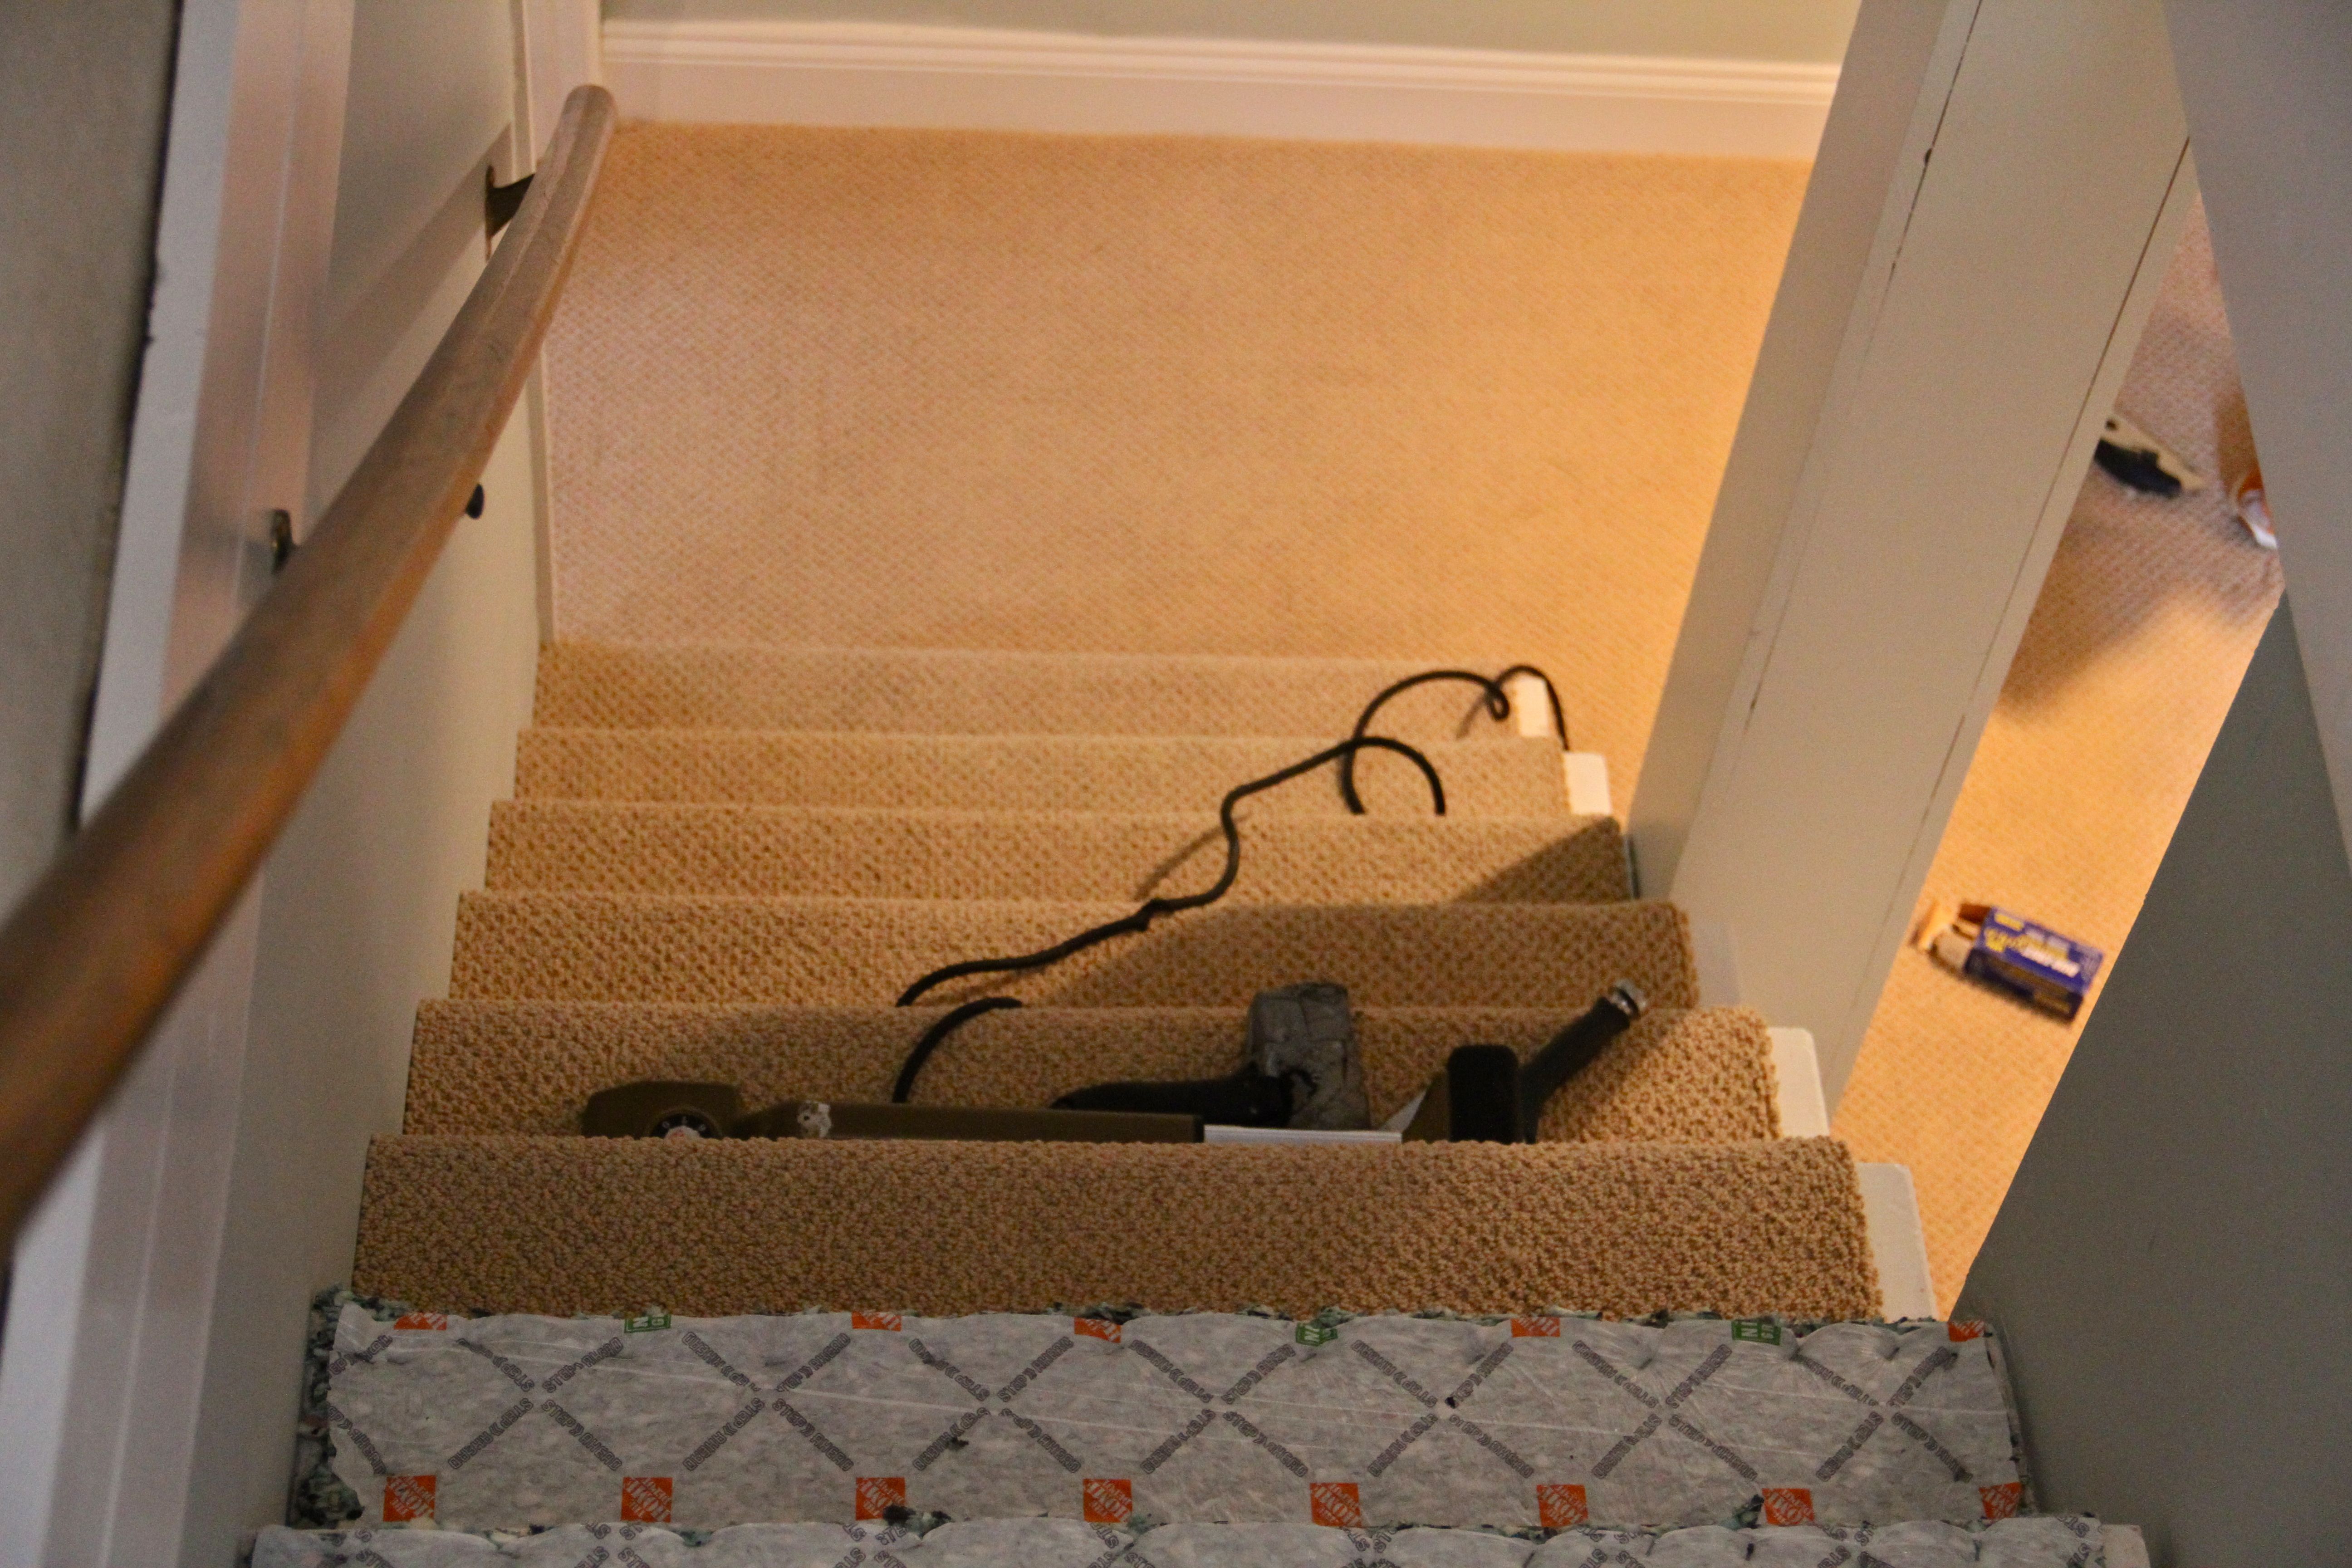 DURING: We ended up having the carpet tucked underneath itself on the stairs where the sides were exposed to the room. It made for a good compromise: no 80s stair wrap, and a bit of exposed white to add to the crisp freshness of the trim throughout the space.